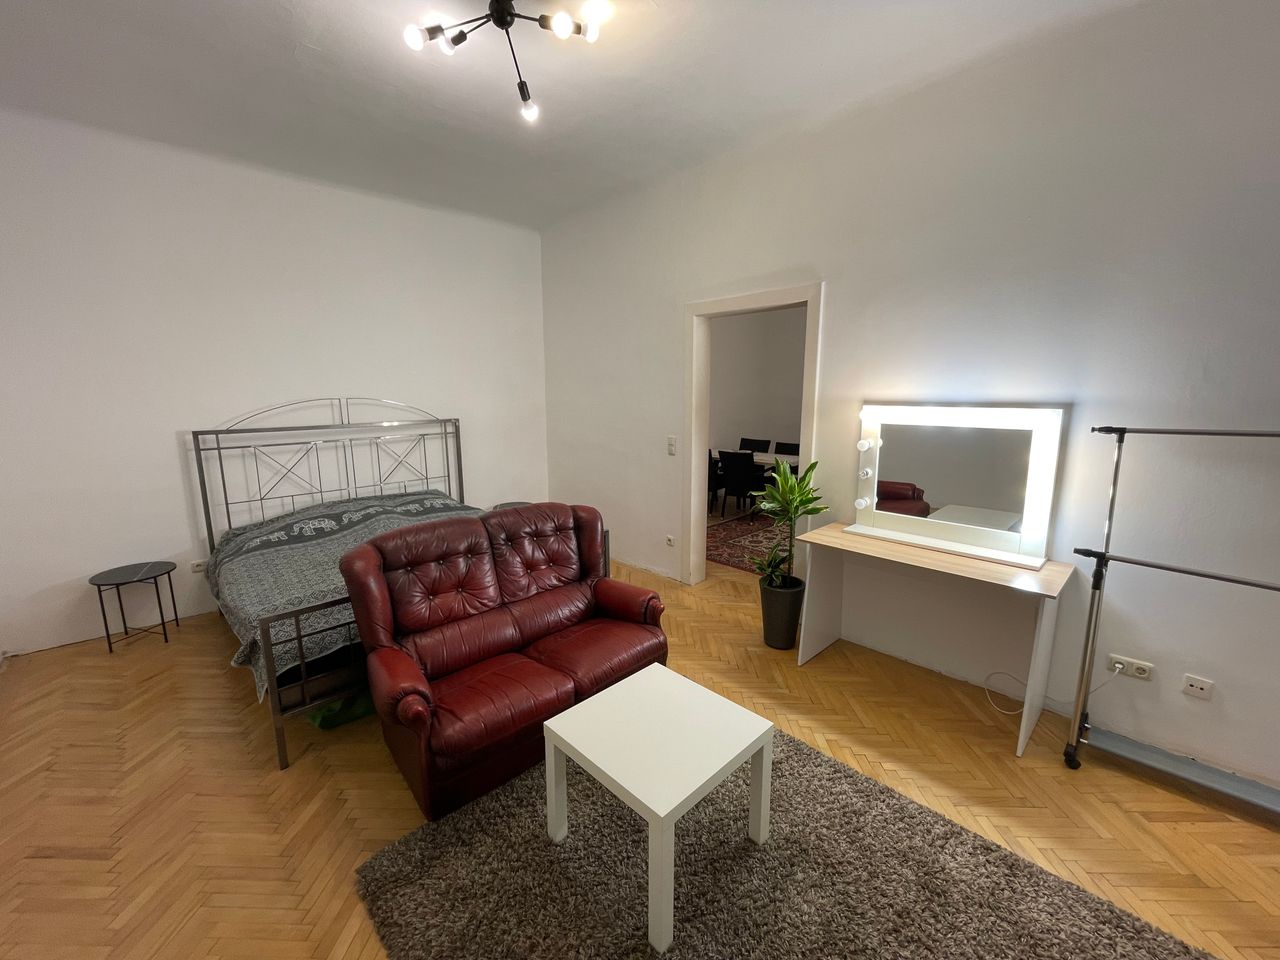 Great old building apartment in a good location with very good transport connections